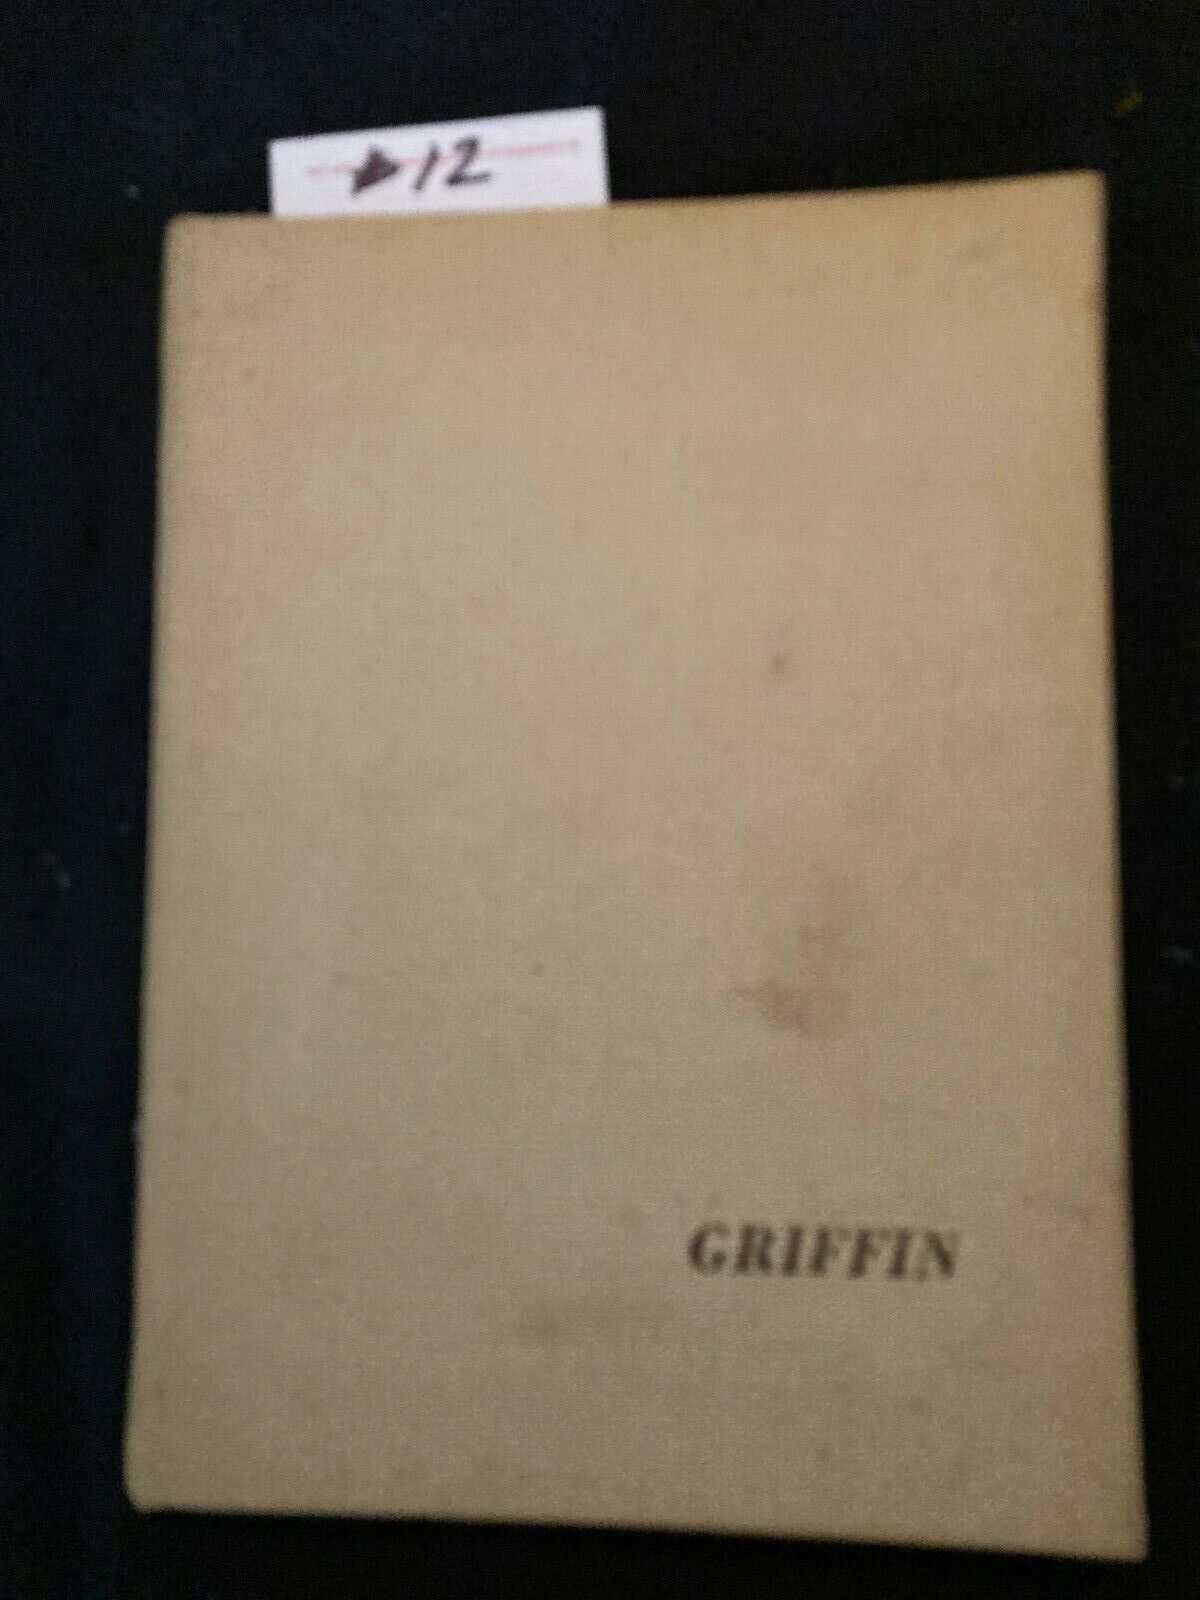 1973 Purnell School Yearbook, The Griffin.-Pottersville, New Jersey